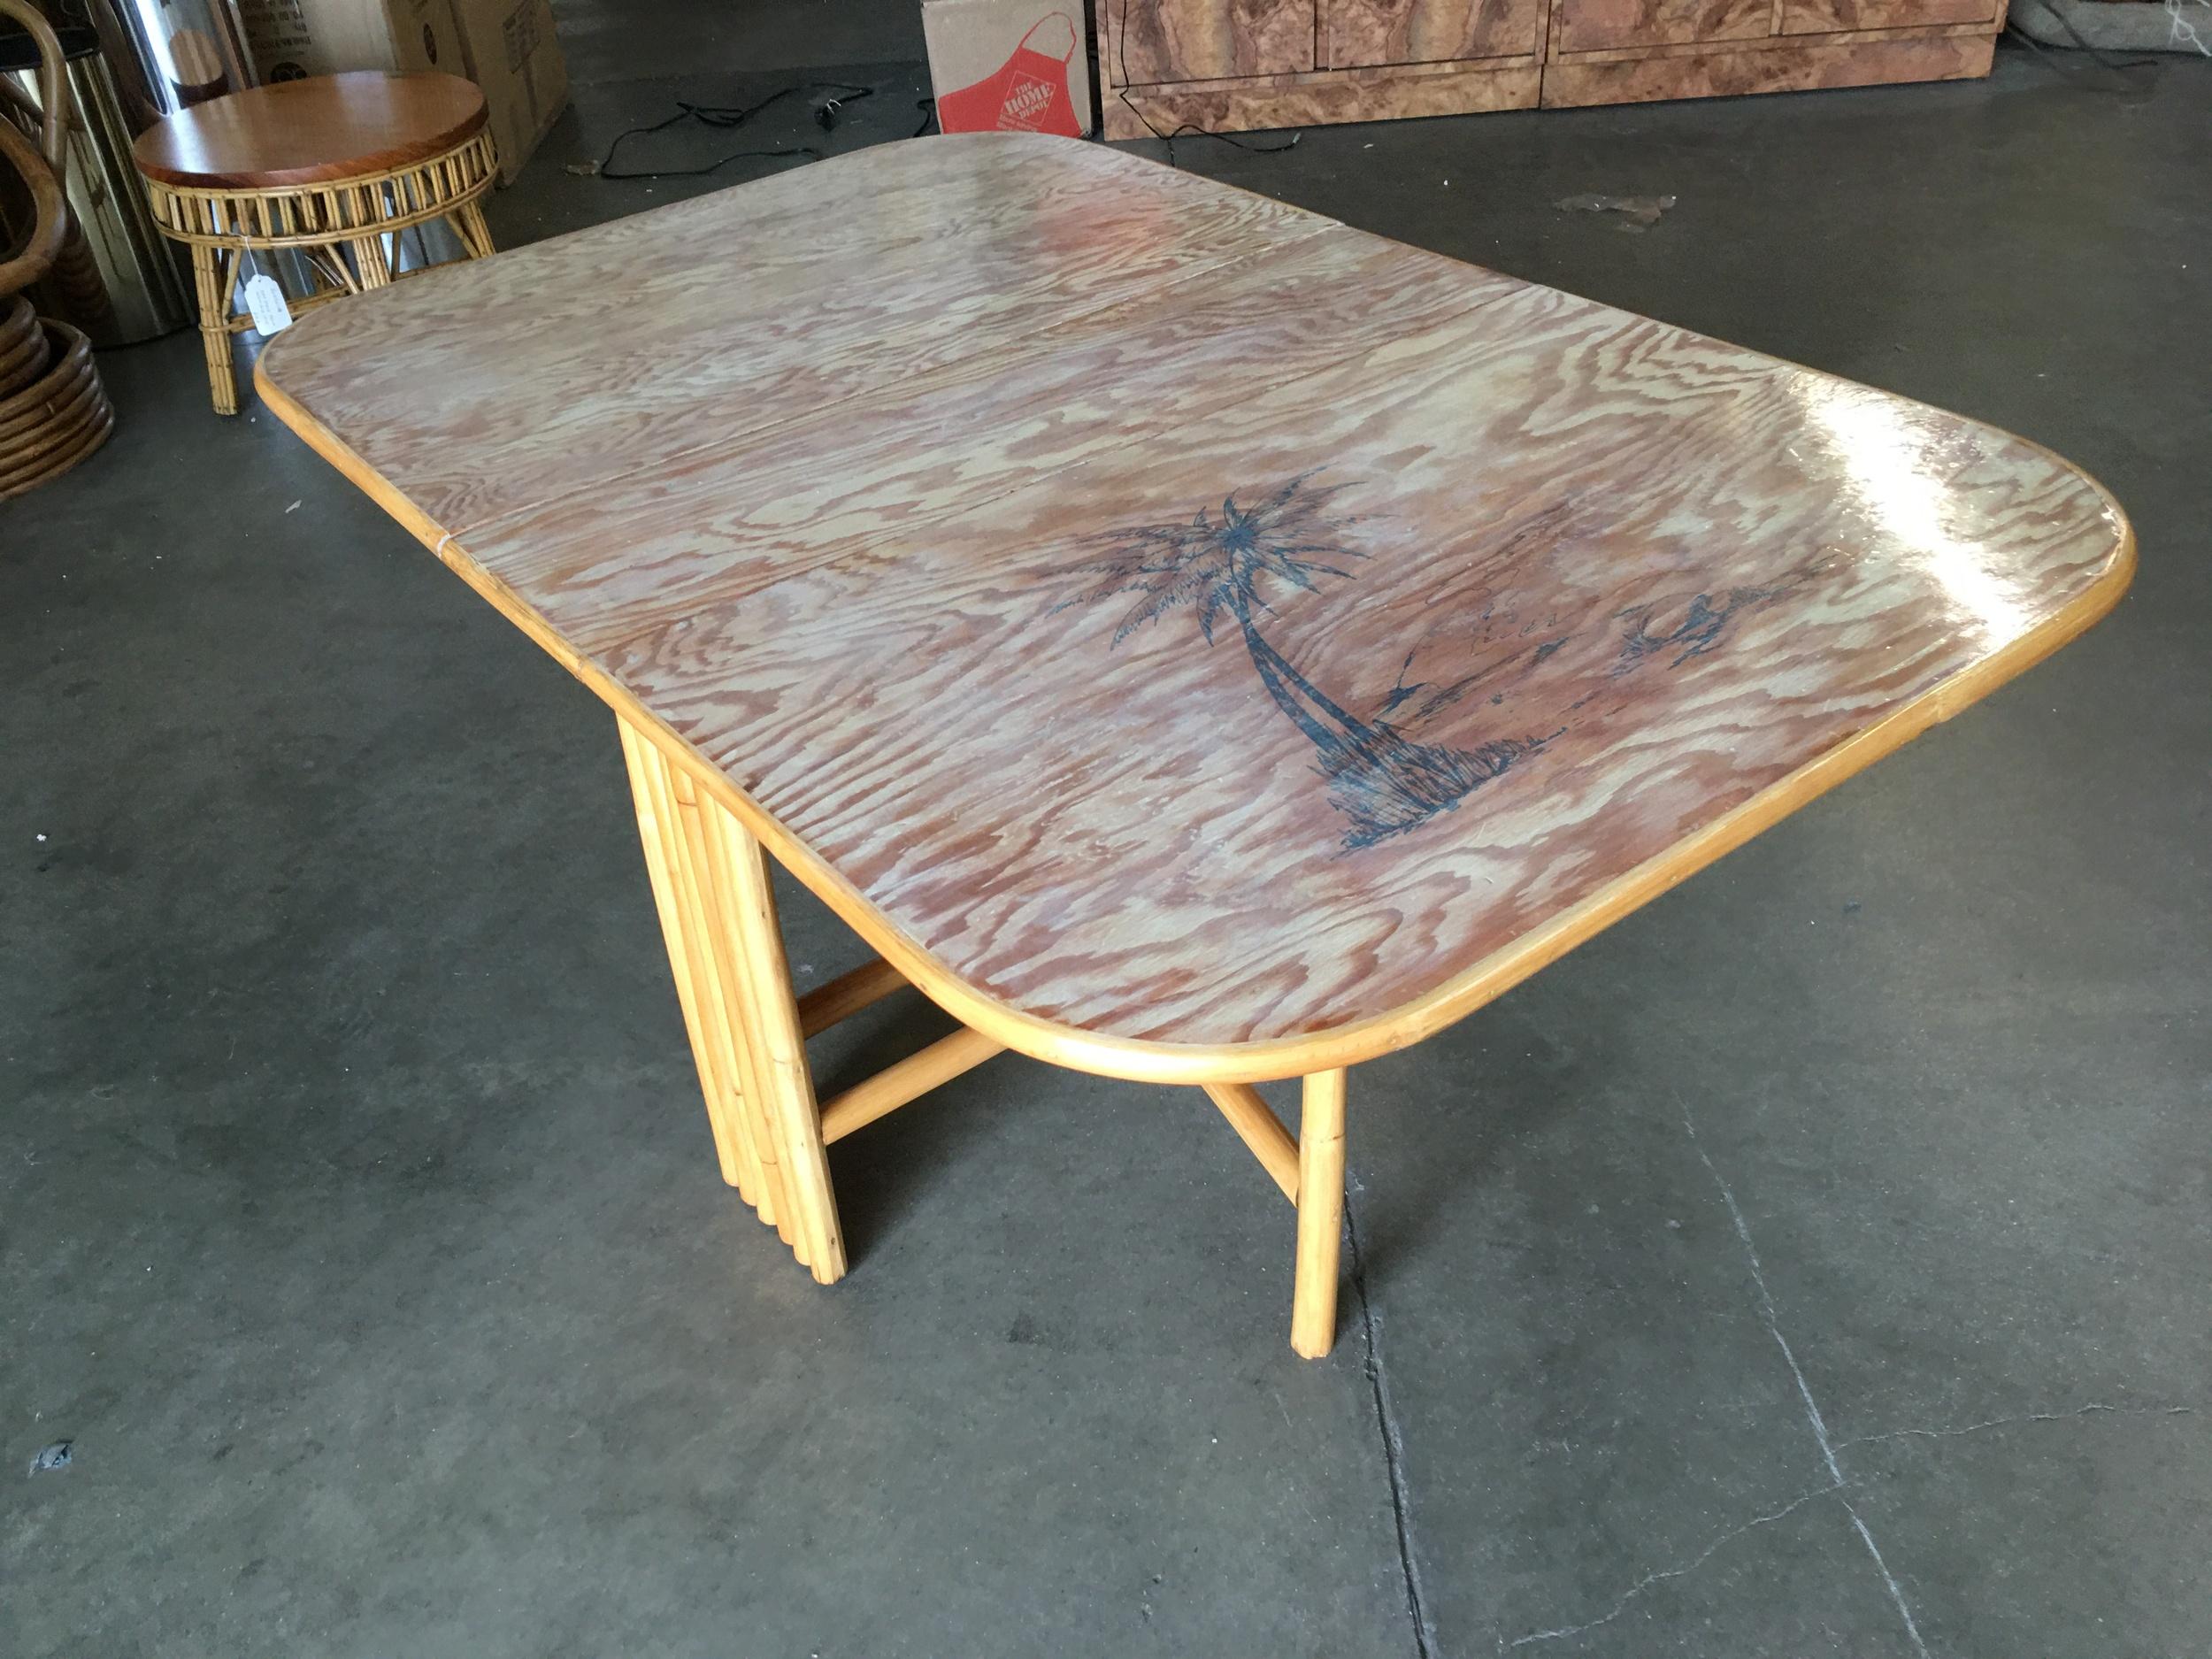 Very rare restored gateleg dining table with screen printed plywood top. 

The table folds in two directions for easy storage.

Size: Open 24